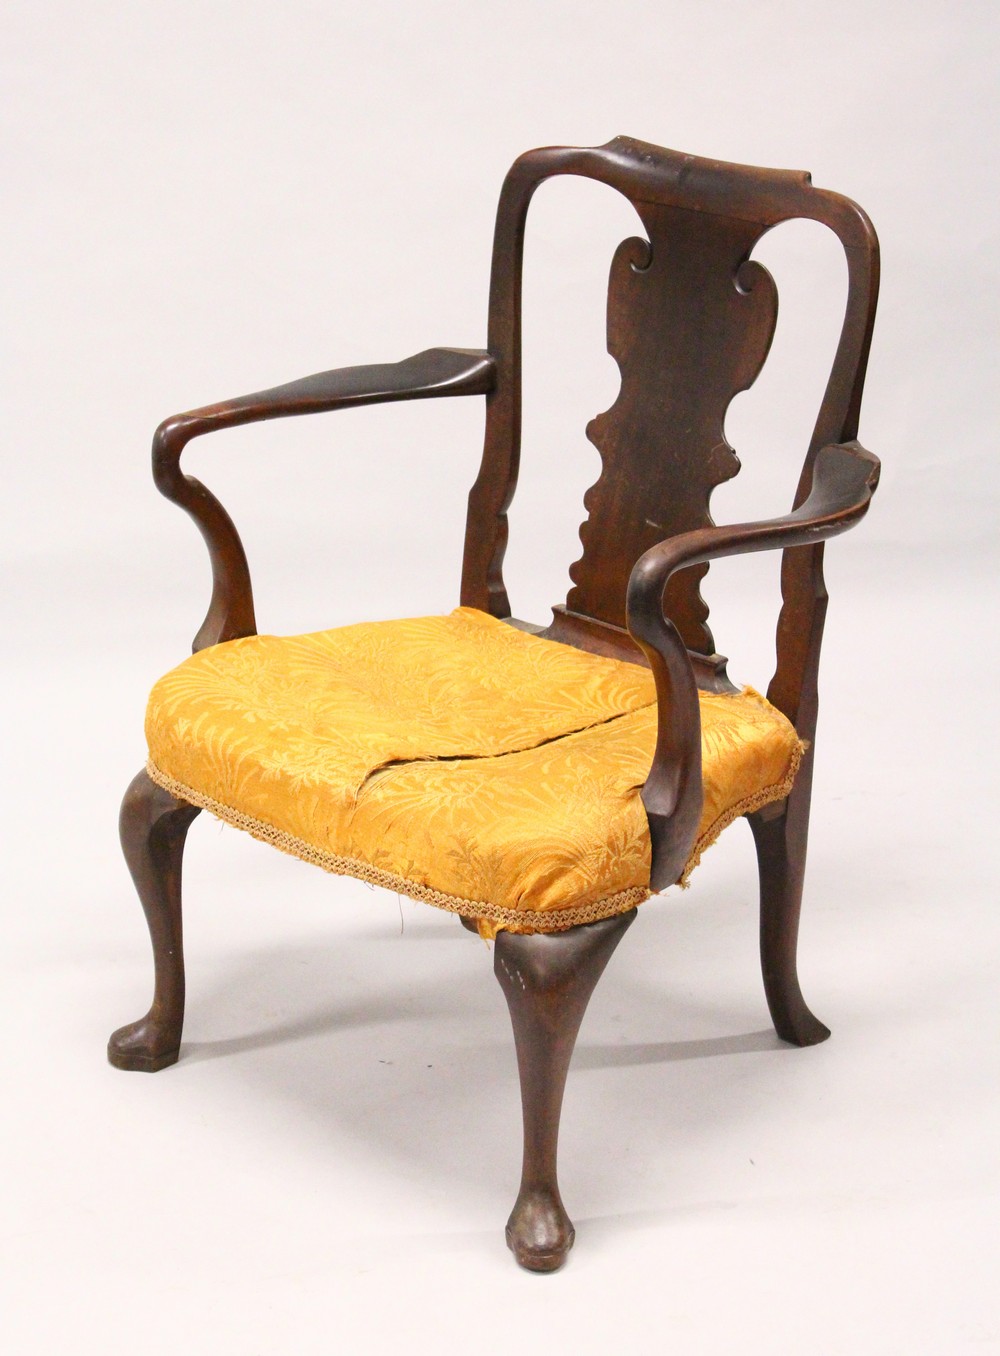 A GEORGE II/III MAHOGANY ARMCHAIR, with curving top rail, vase shaped splat, overstuffed seat on